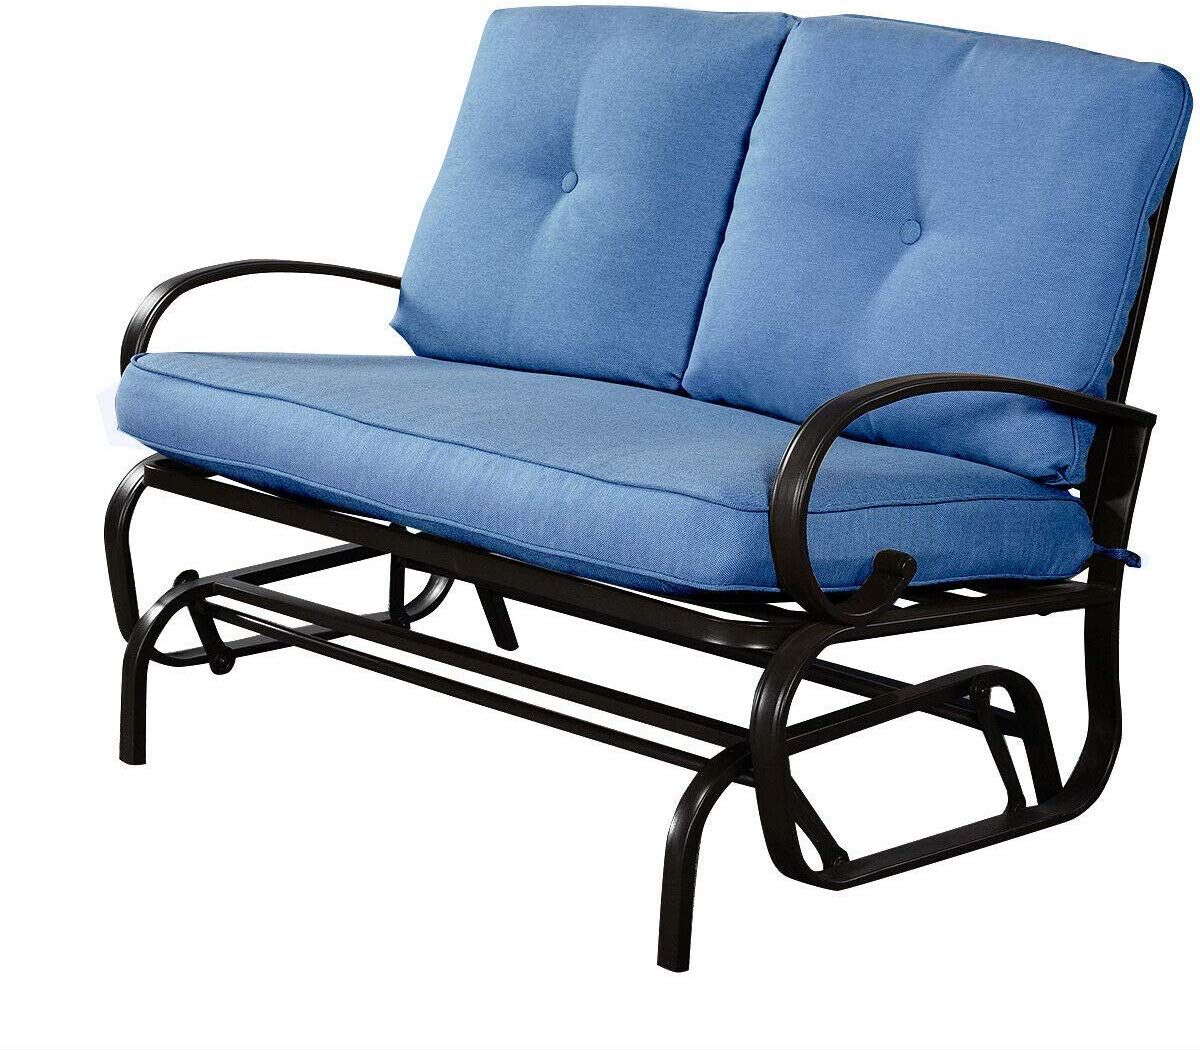 2020 Cushioned Glider Benches With Cushions Inside Amazon: Outdoor Patio Glider Bench Loveseat For 2 Person (View 18 of 30)